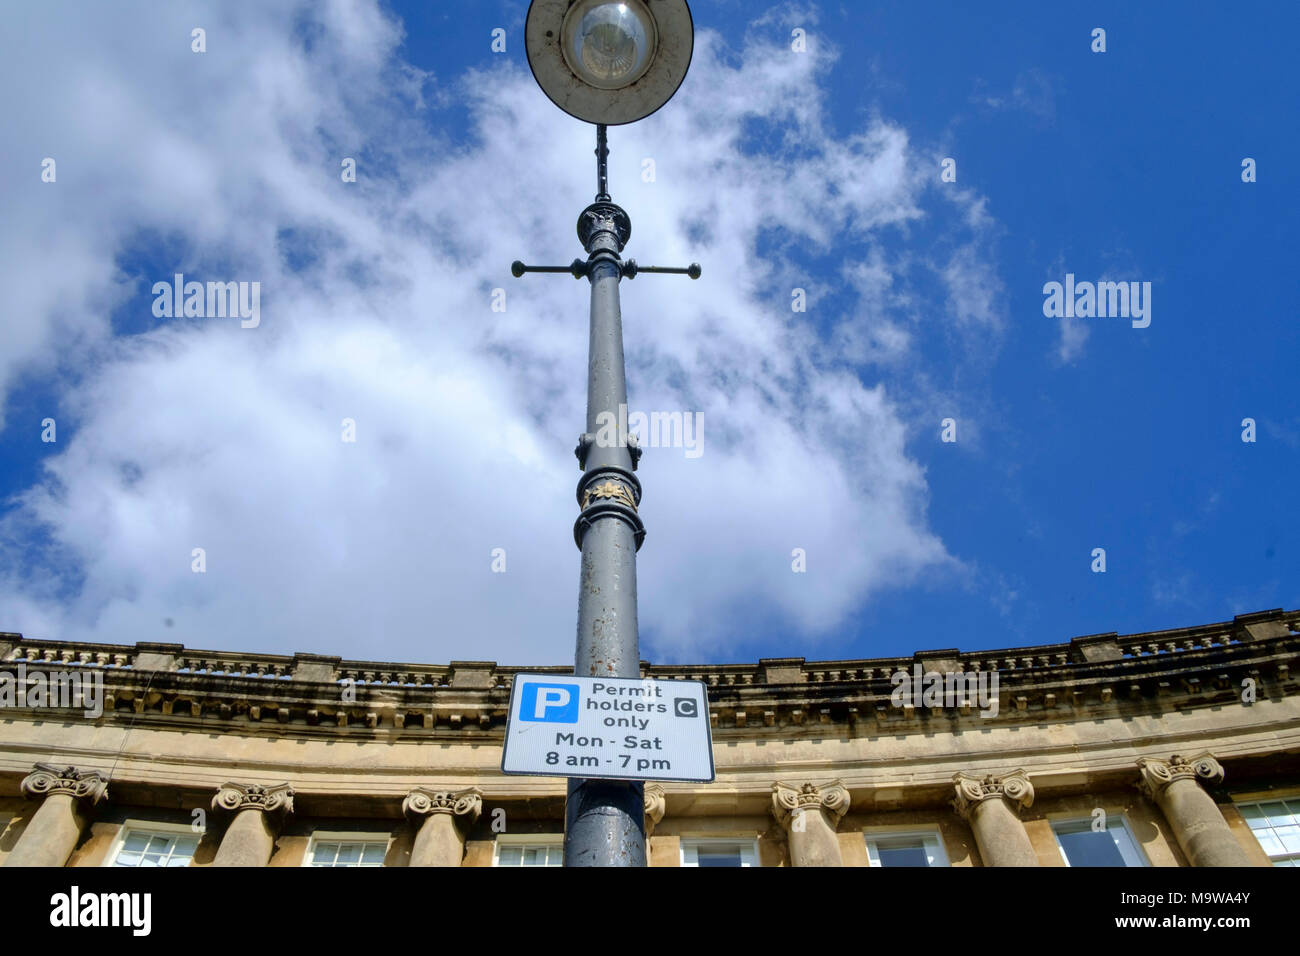 Car Parking in Somerset City of Bath,england UK Permit parking only Stock Photo